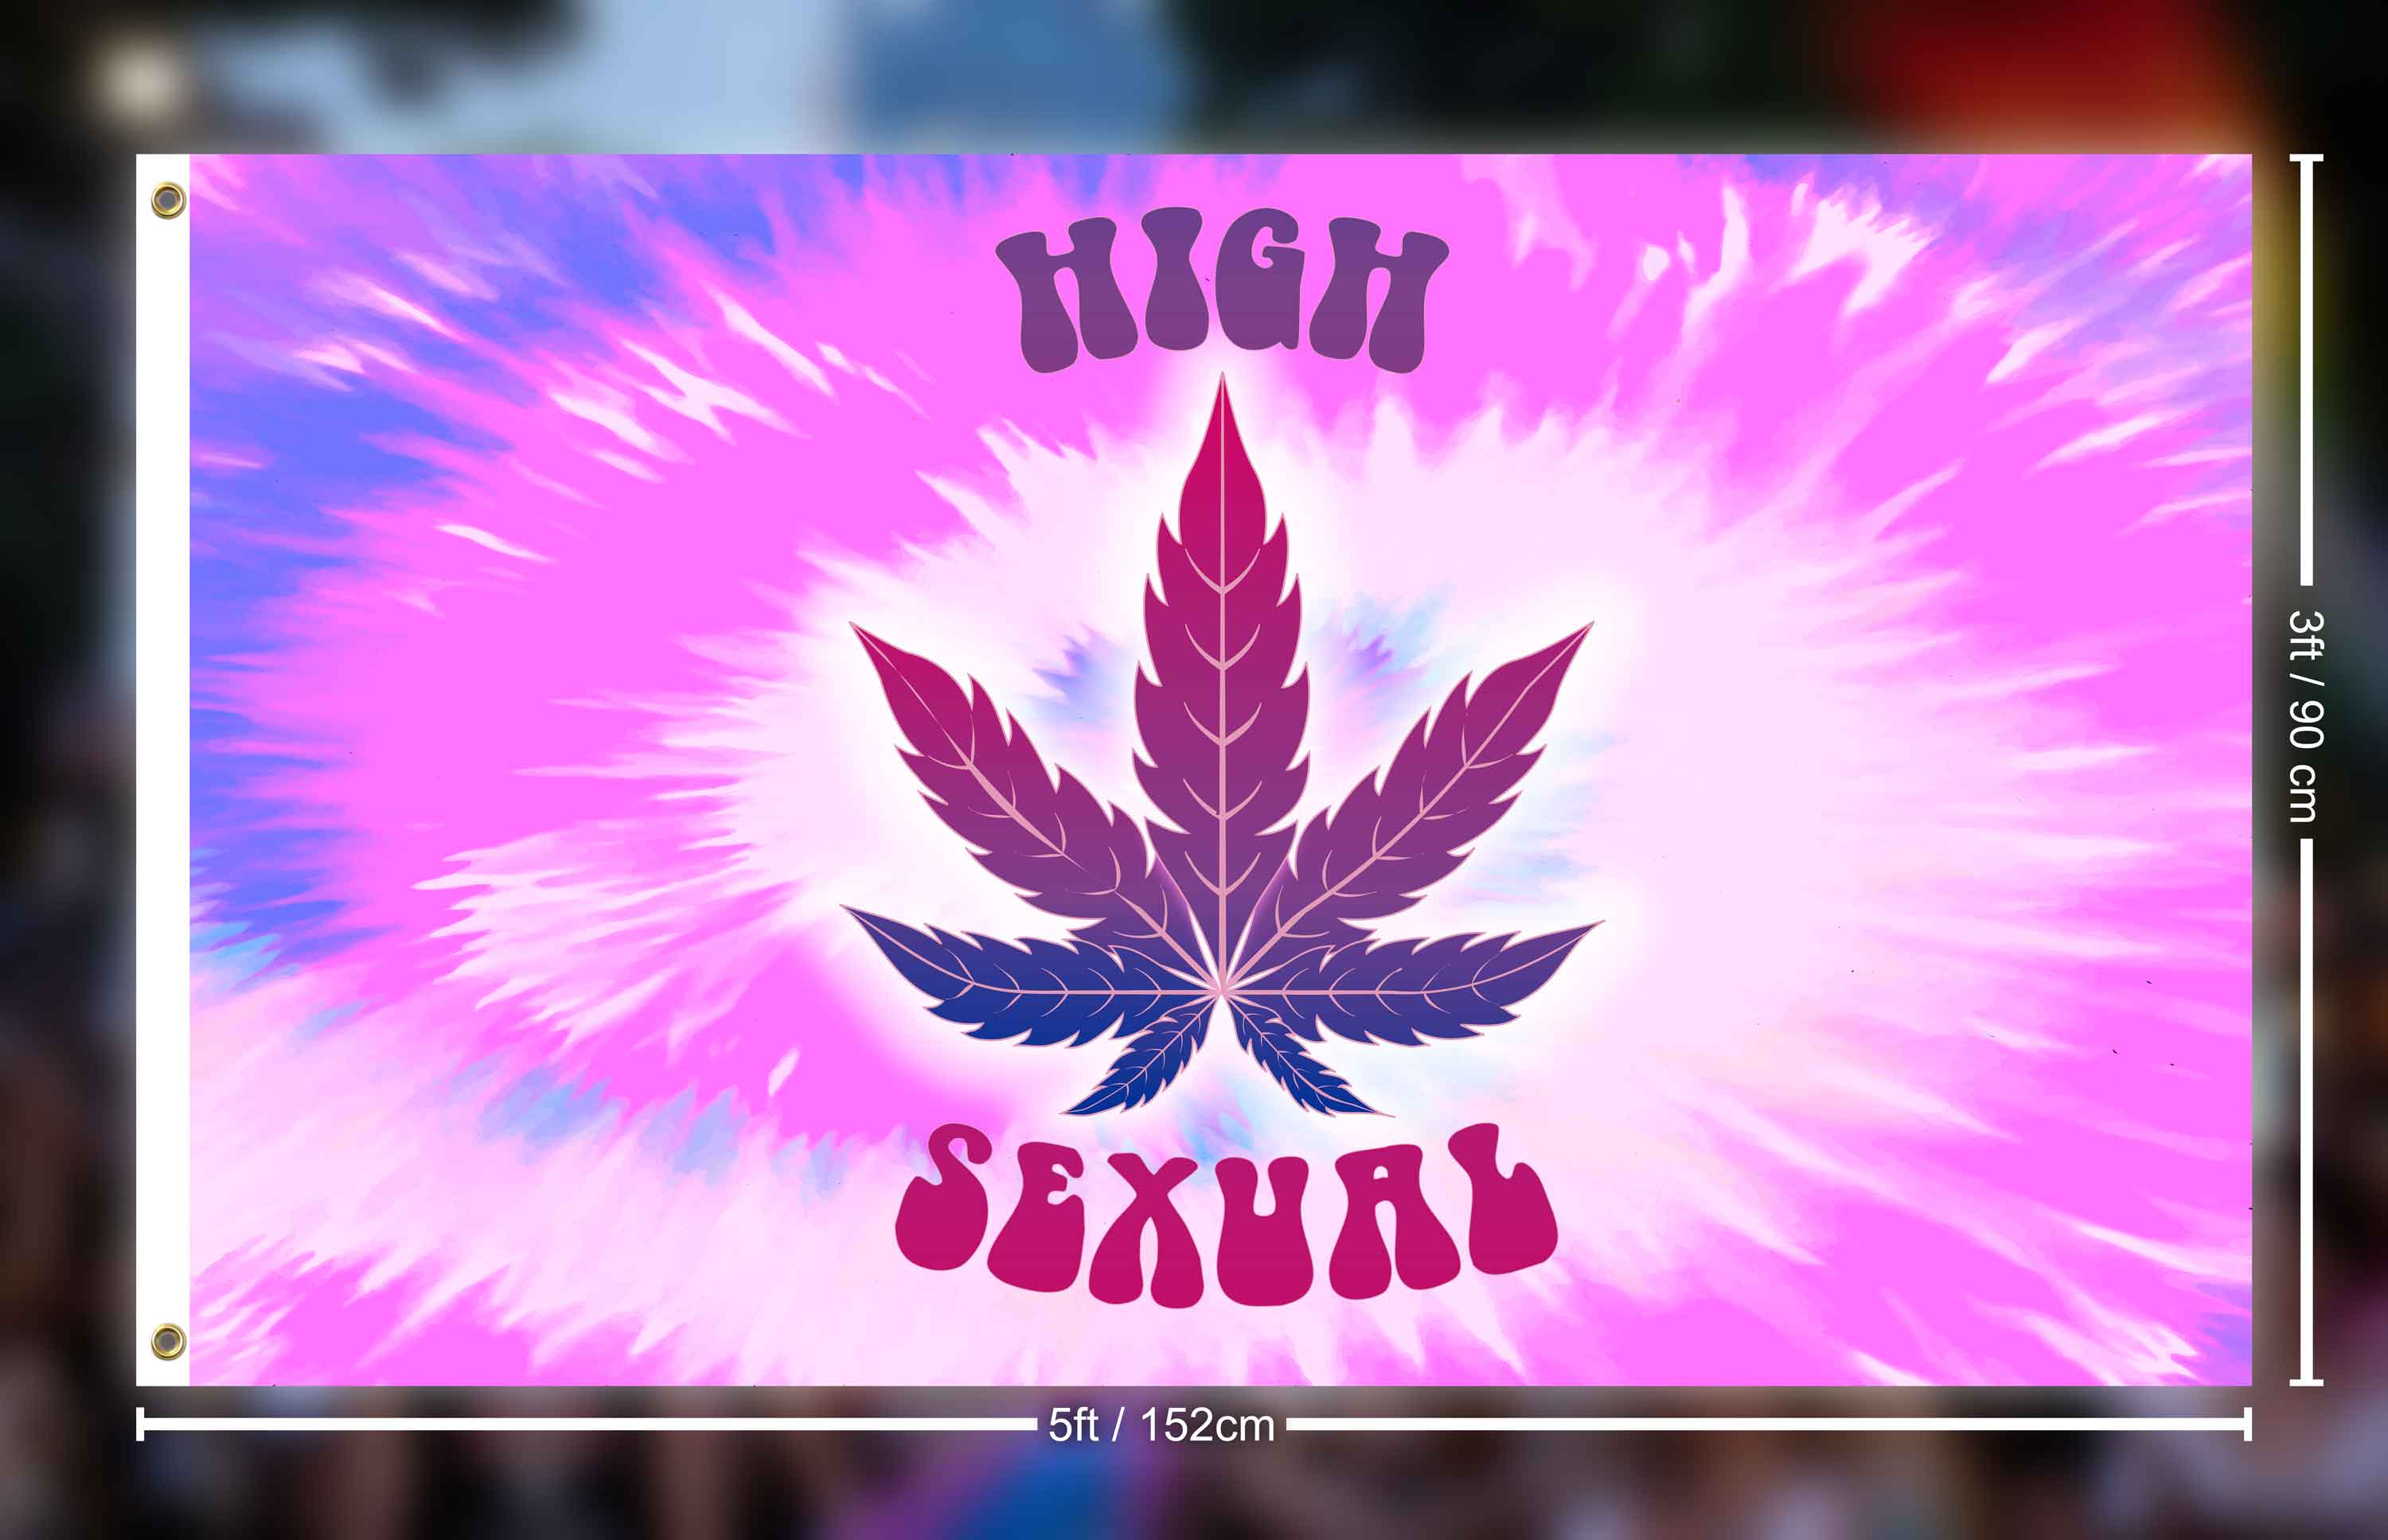 High Sexual - 3x5ft Flag